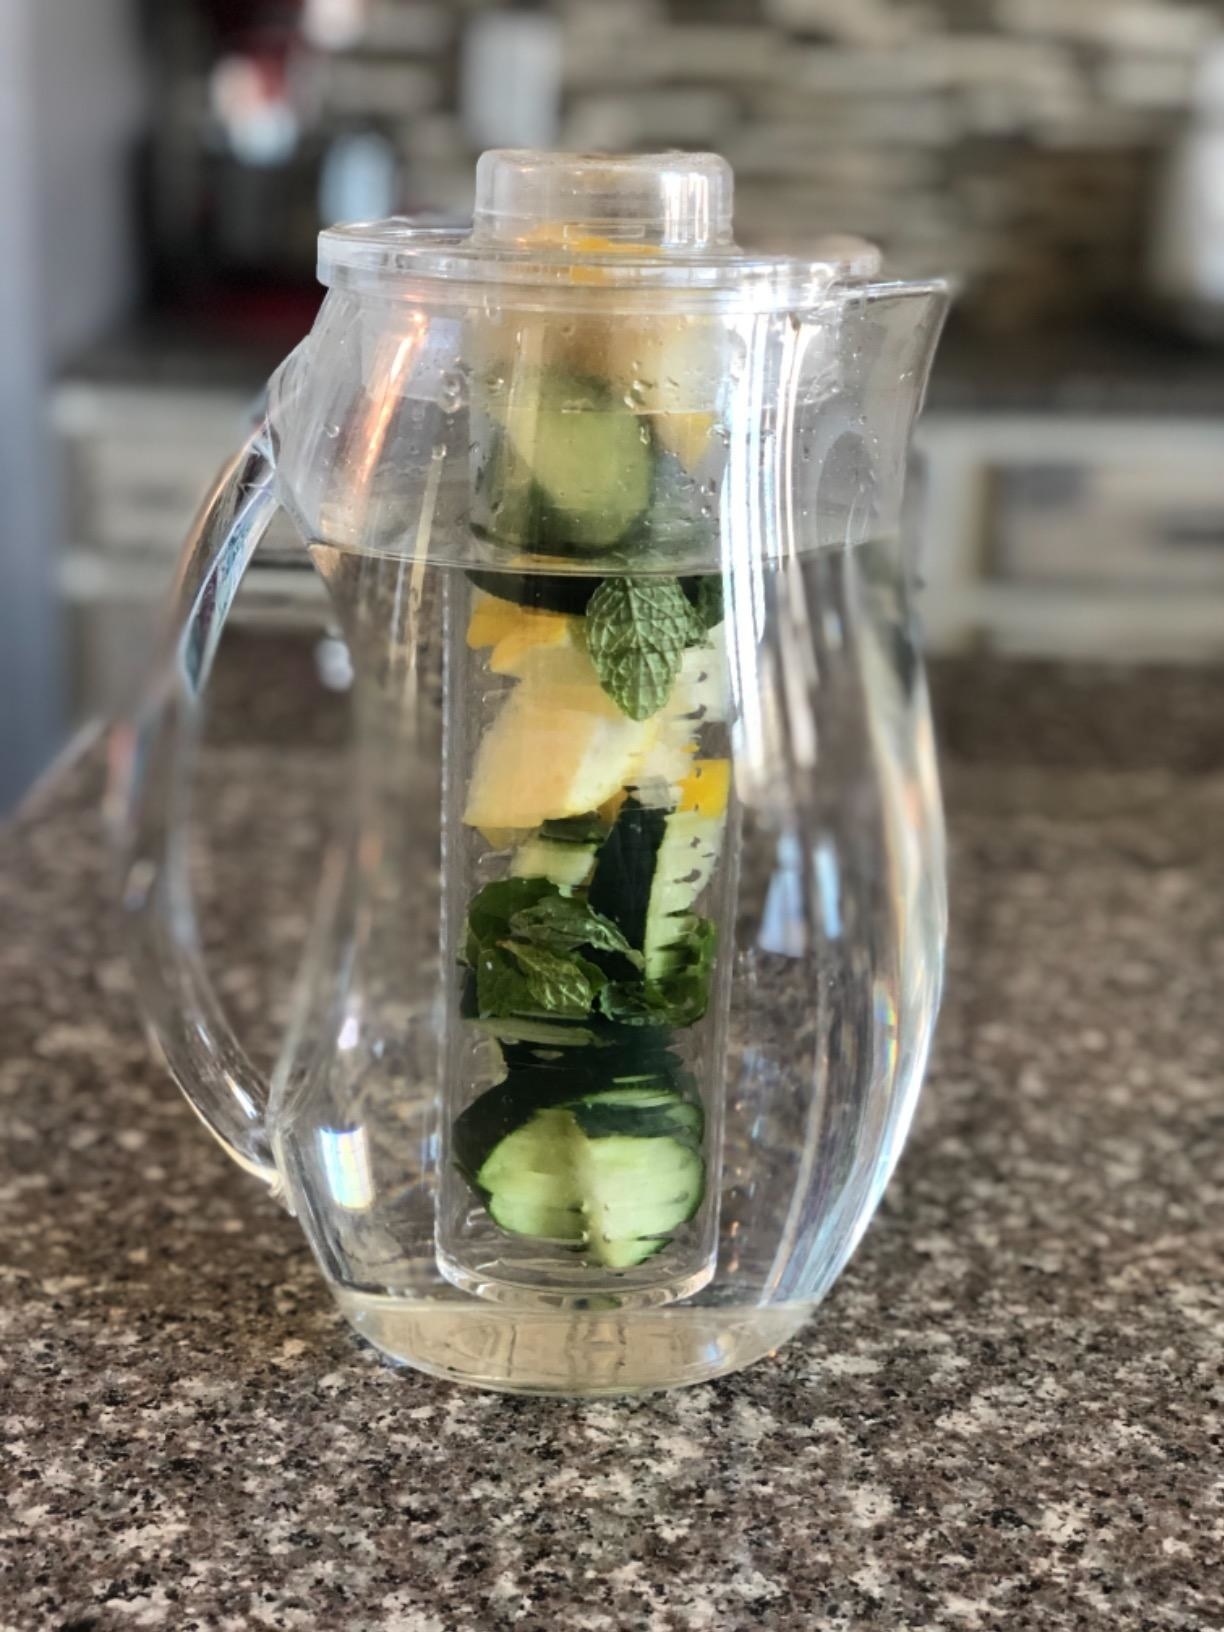 The pitcher filled with water and infused with mint, lemon, and cucumber